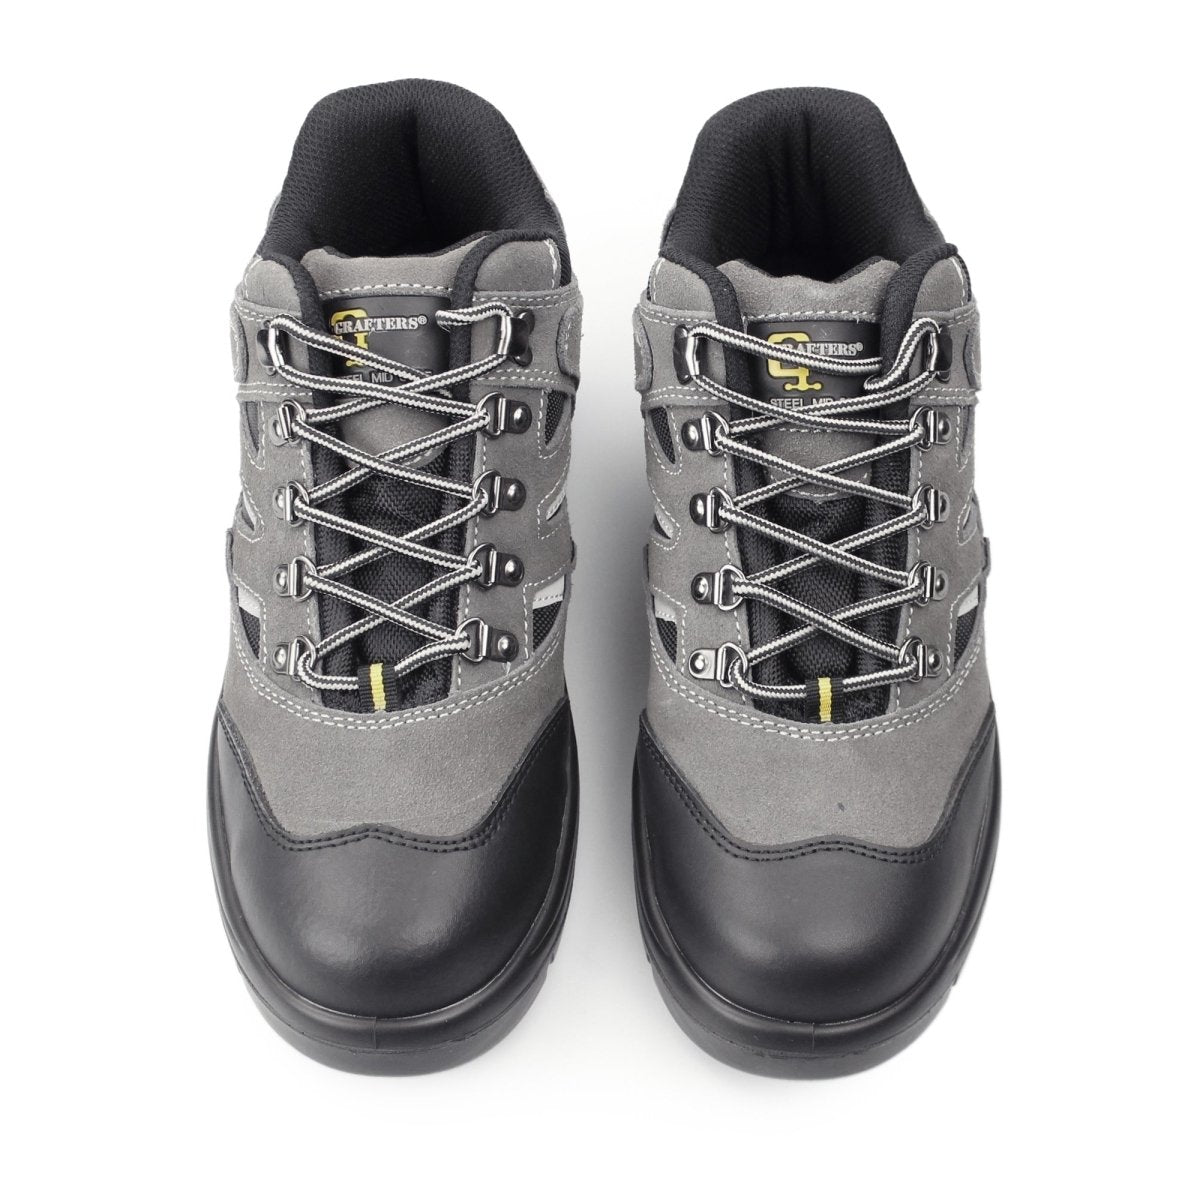 Grafters M685F Unisex Suede Hiking Safety Boots Grey/Black M685F - 5 | STB.co.uk